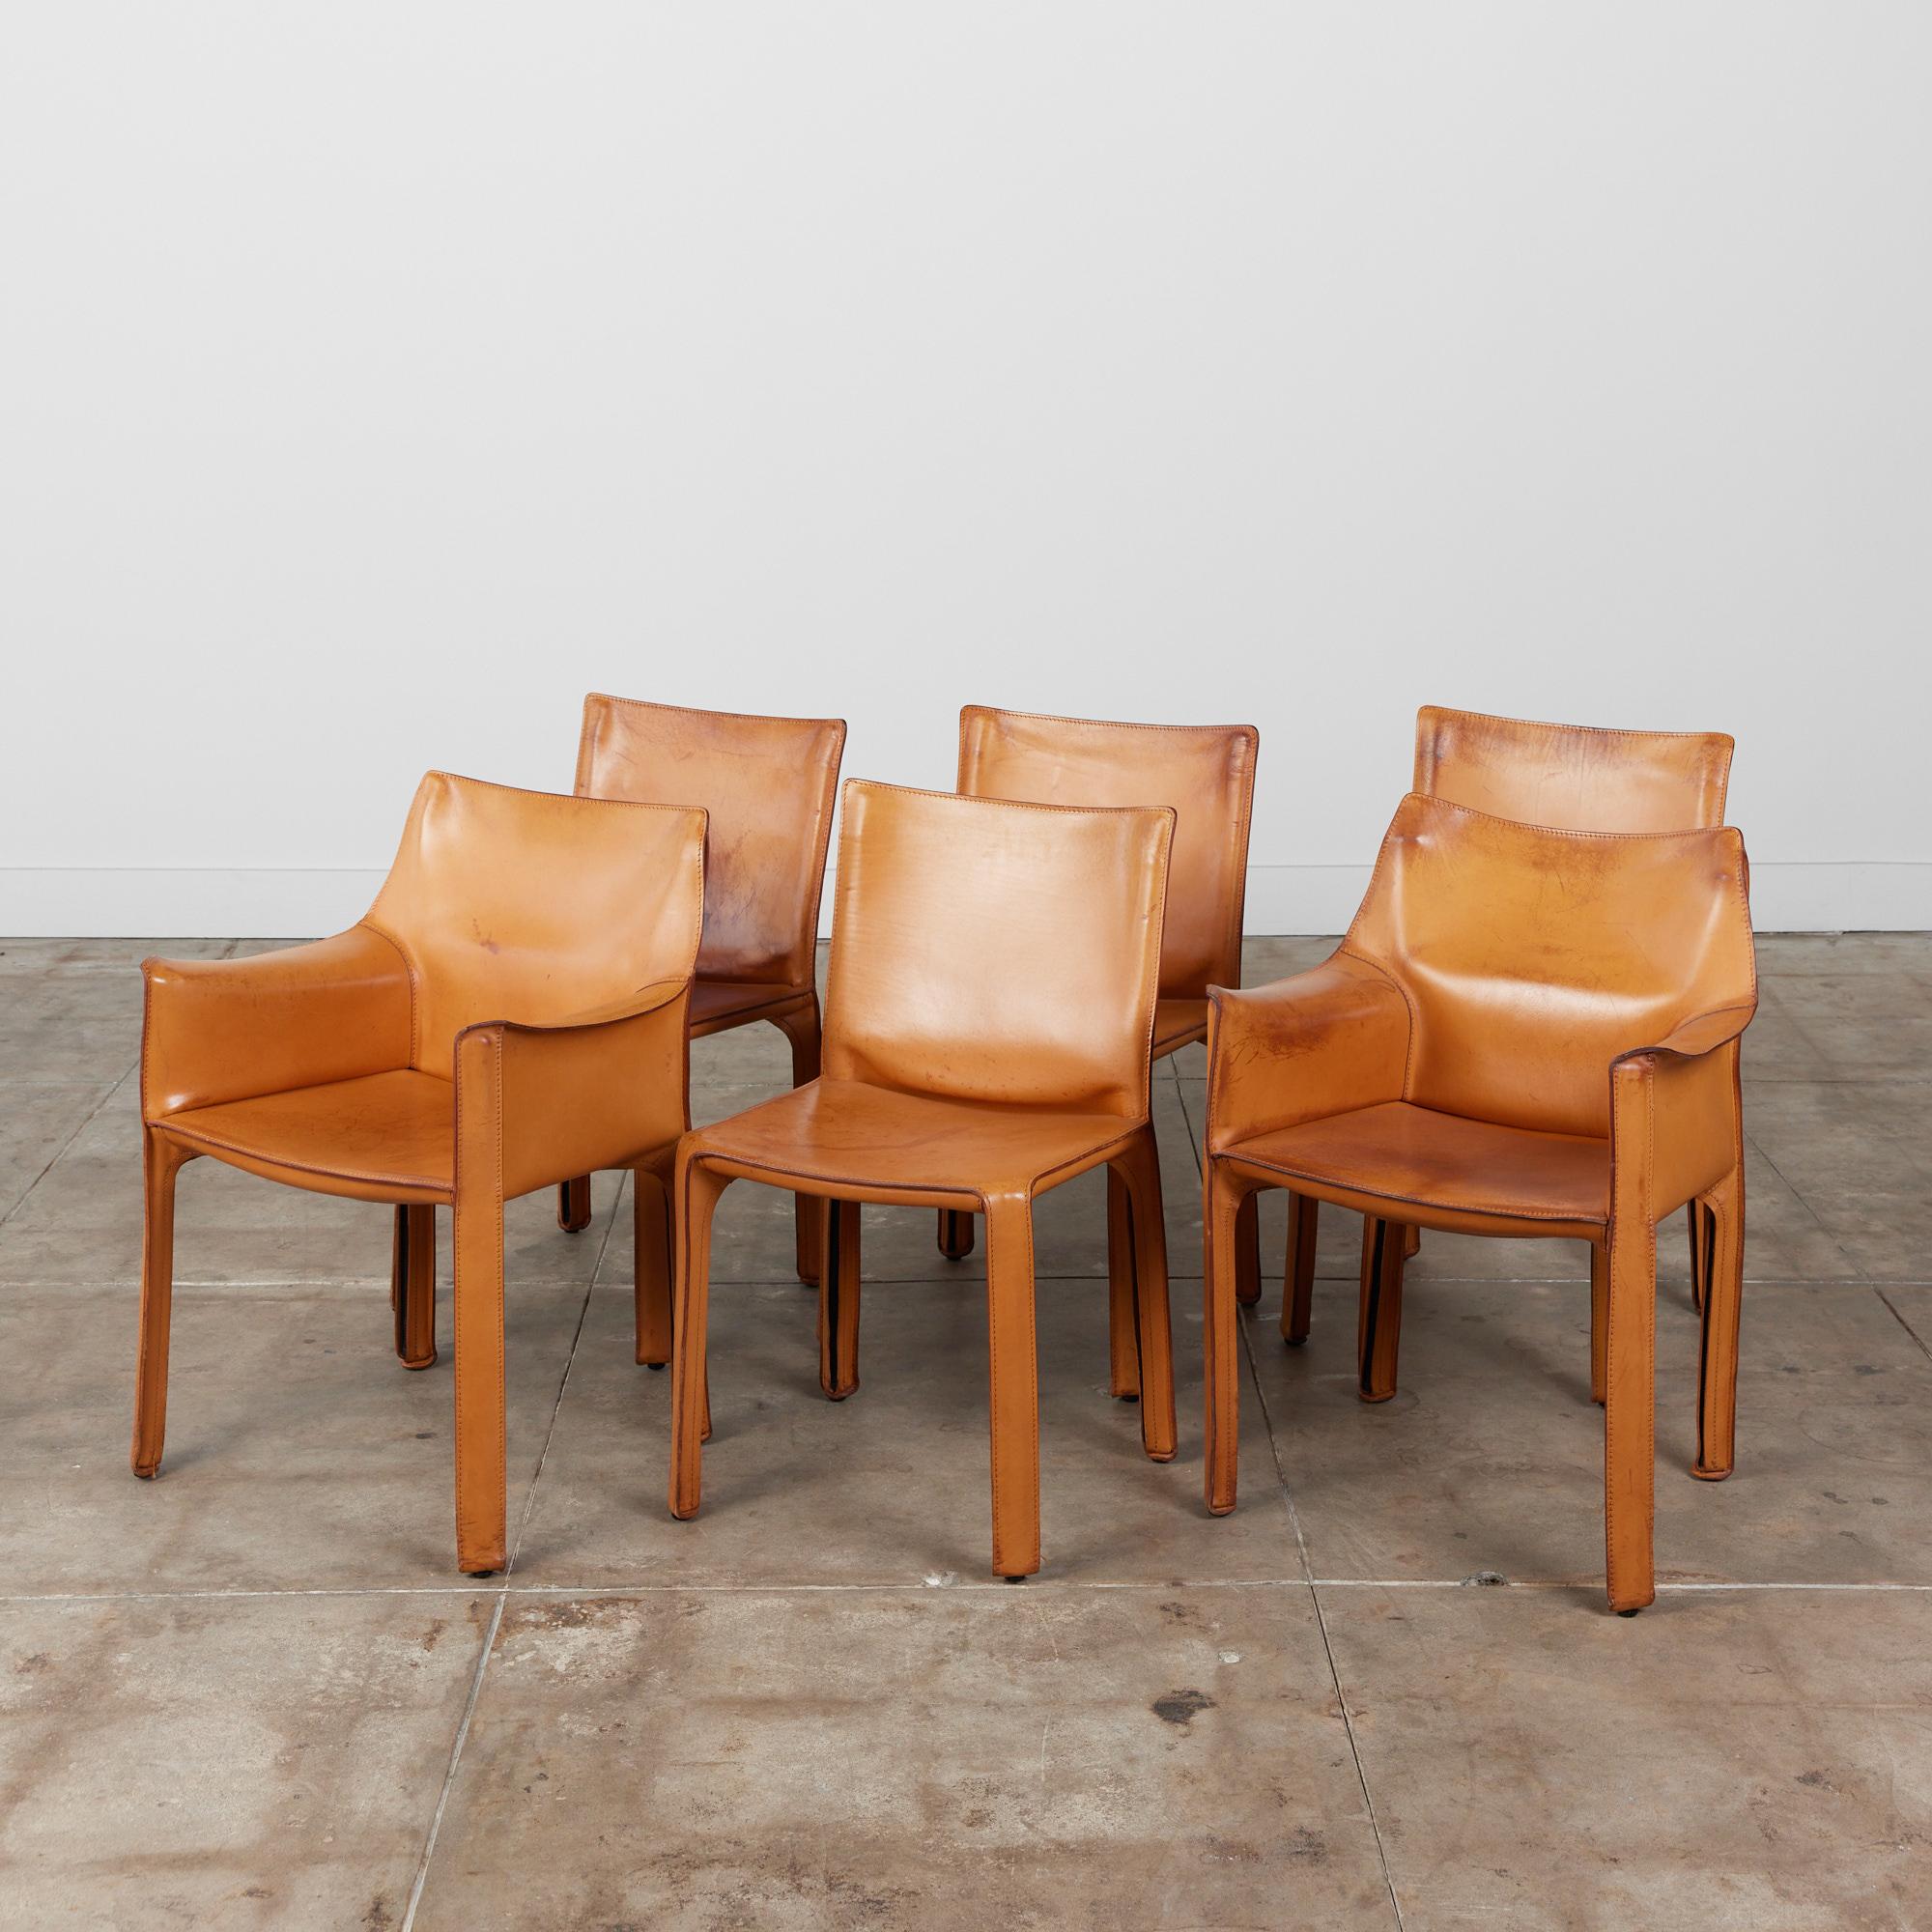 The iconic chairs designed by Mario Bellini for Cassina, circa 1970s, Italy, feature the original camel saddle leather which is wrapped atop the steel frames. This set of six consists of two armchairs and four side chairs. The back legs feature a